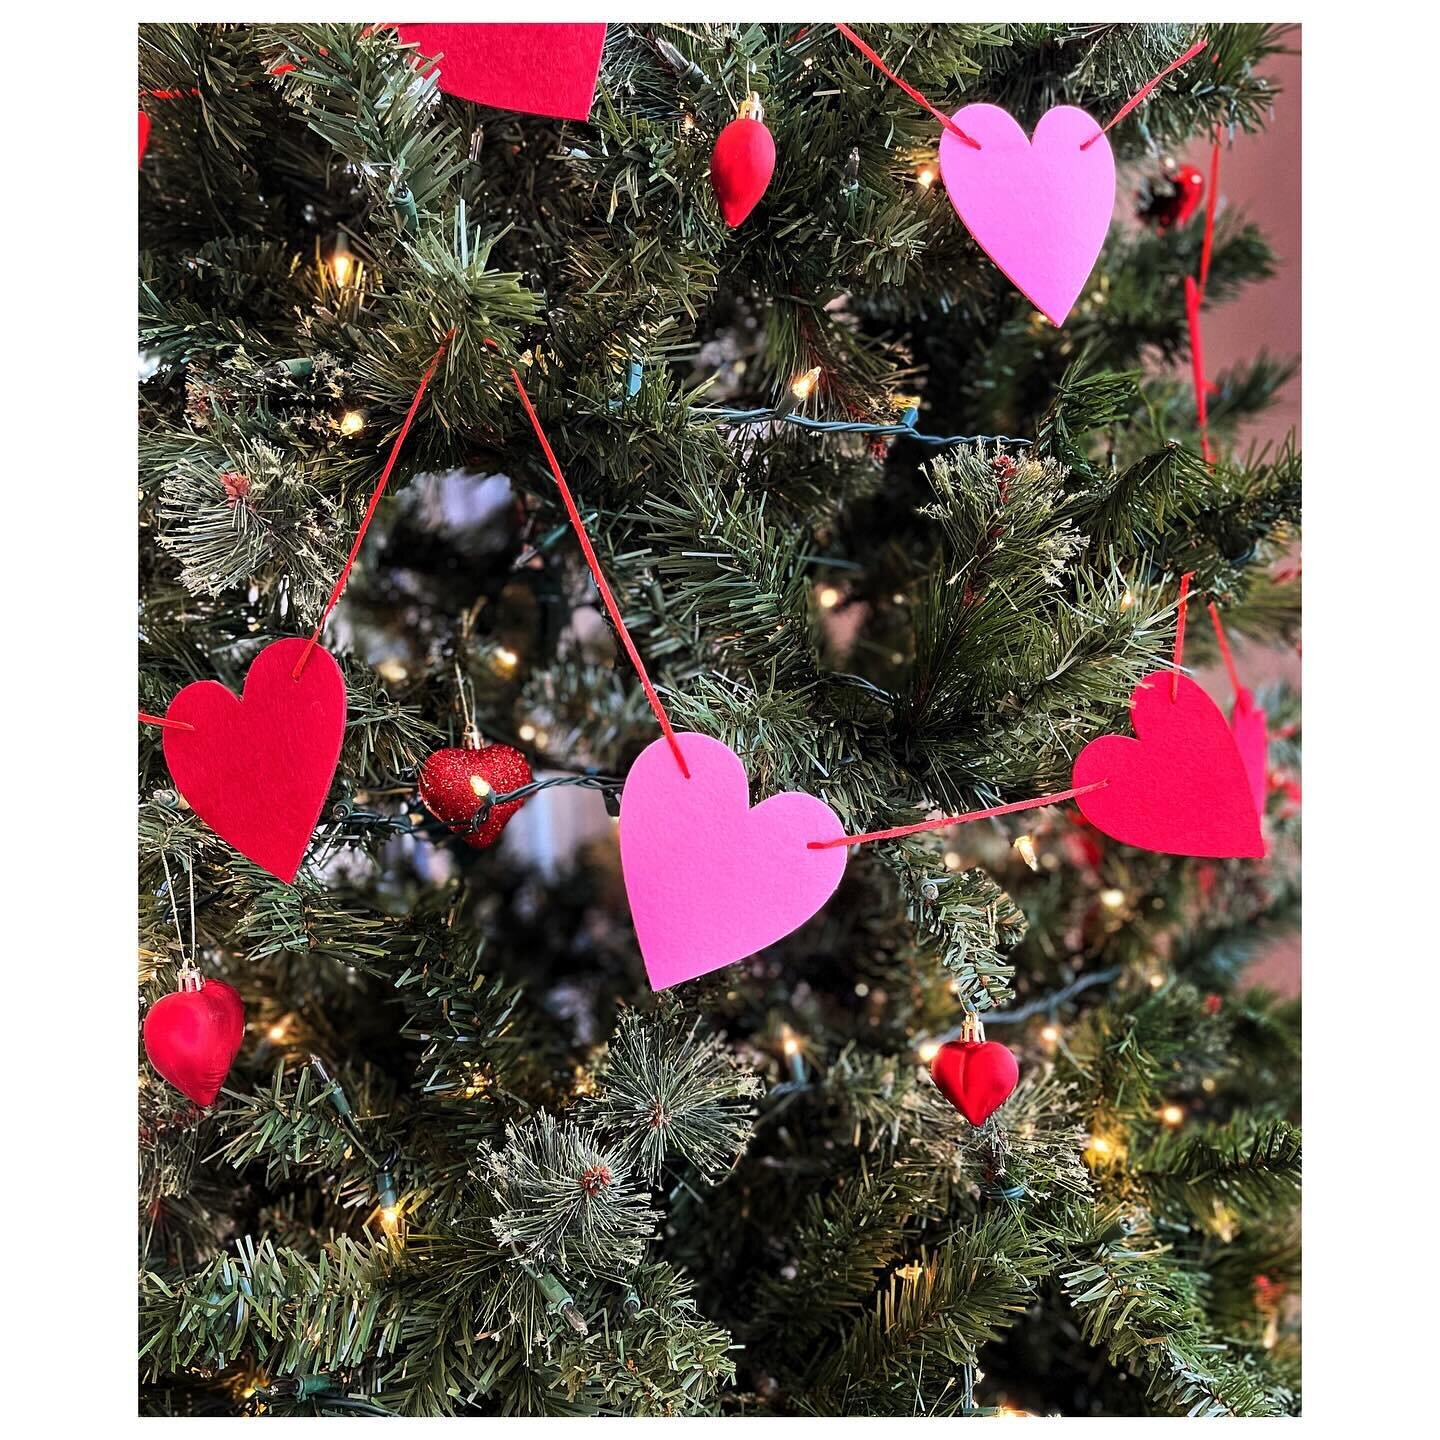 Make your own Valentine ornaments with us! We will provide all the supplies, while they last, to create your own ornament to place on our office tree. Bring photos of your loved ones or pets to include on the ornament, and once we take down the decor